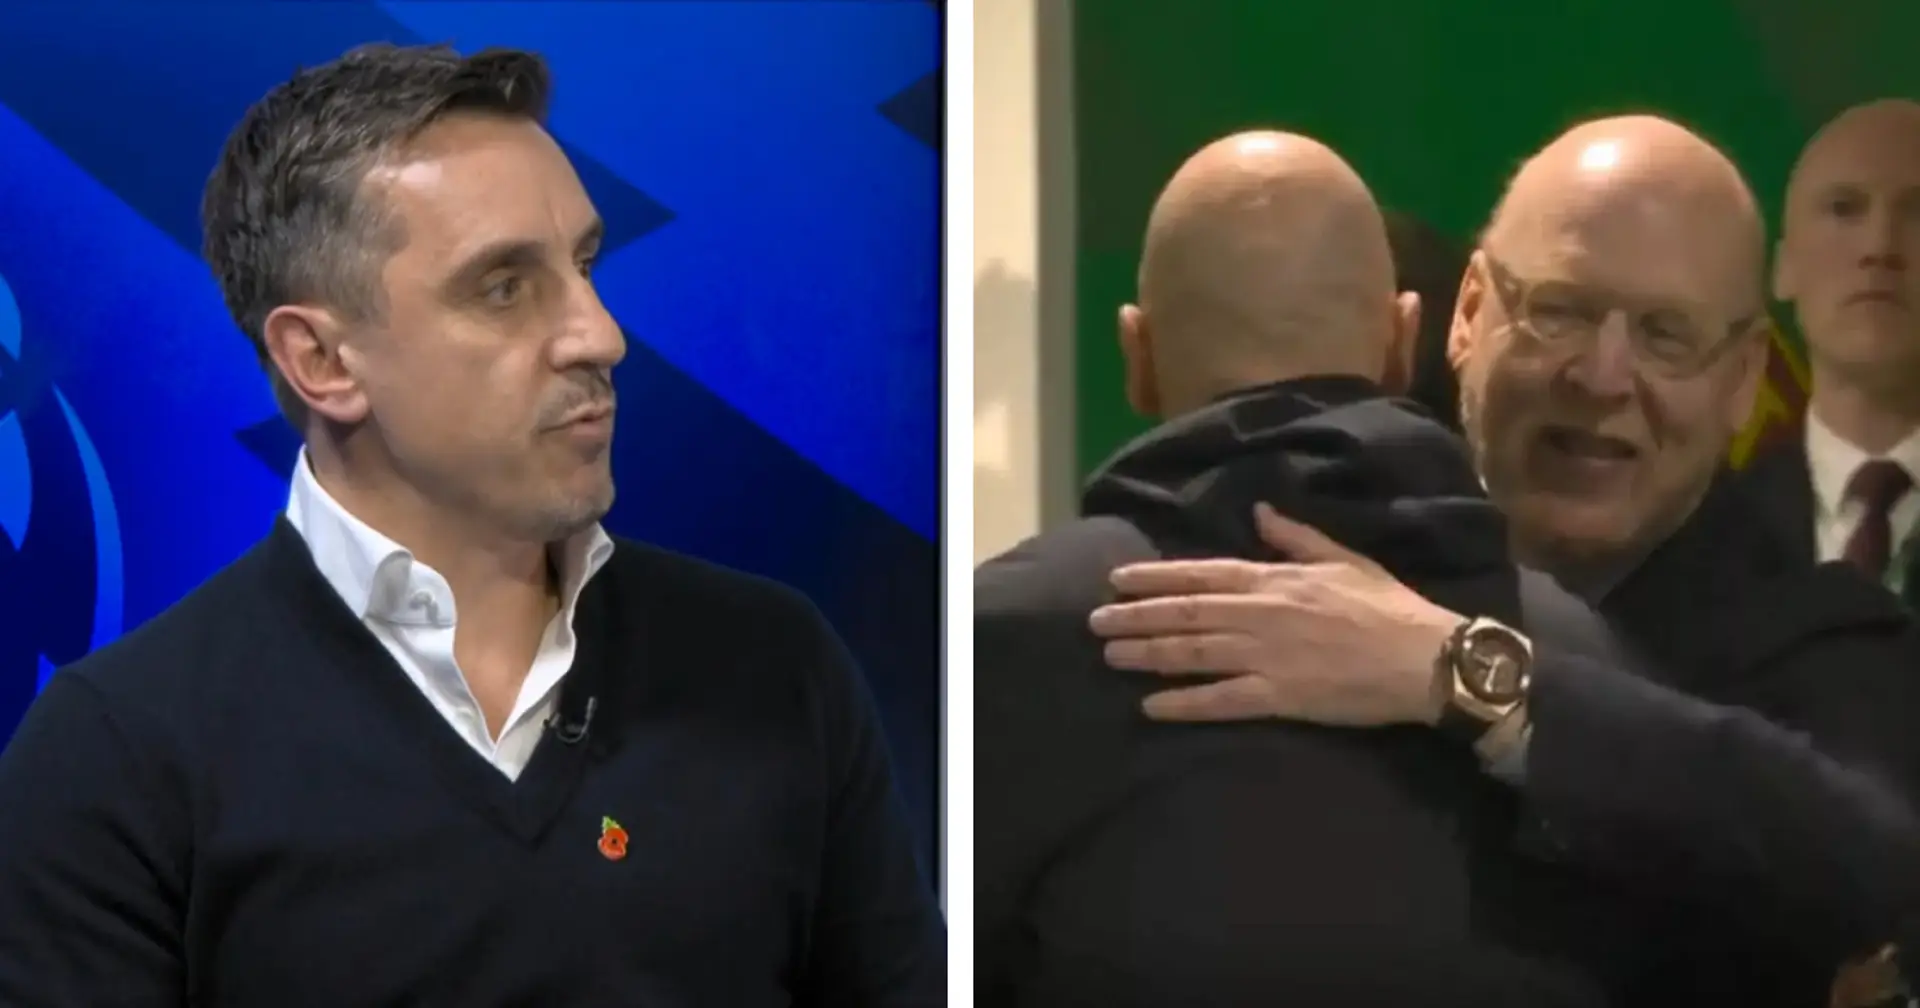 Gary Neville names the side to blame for Man United struggles — Glazers or Ten Hag